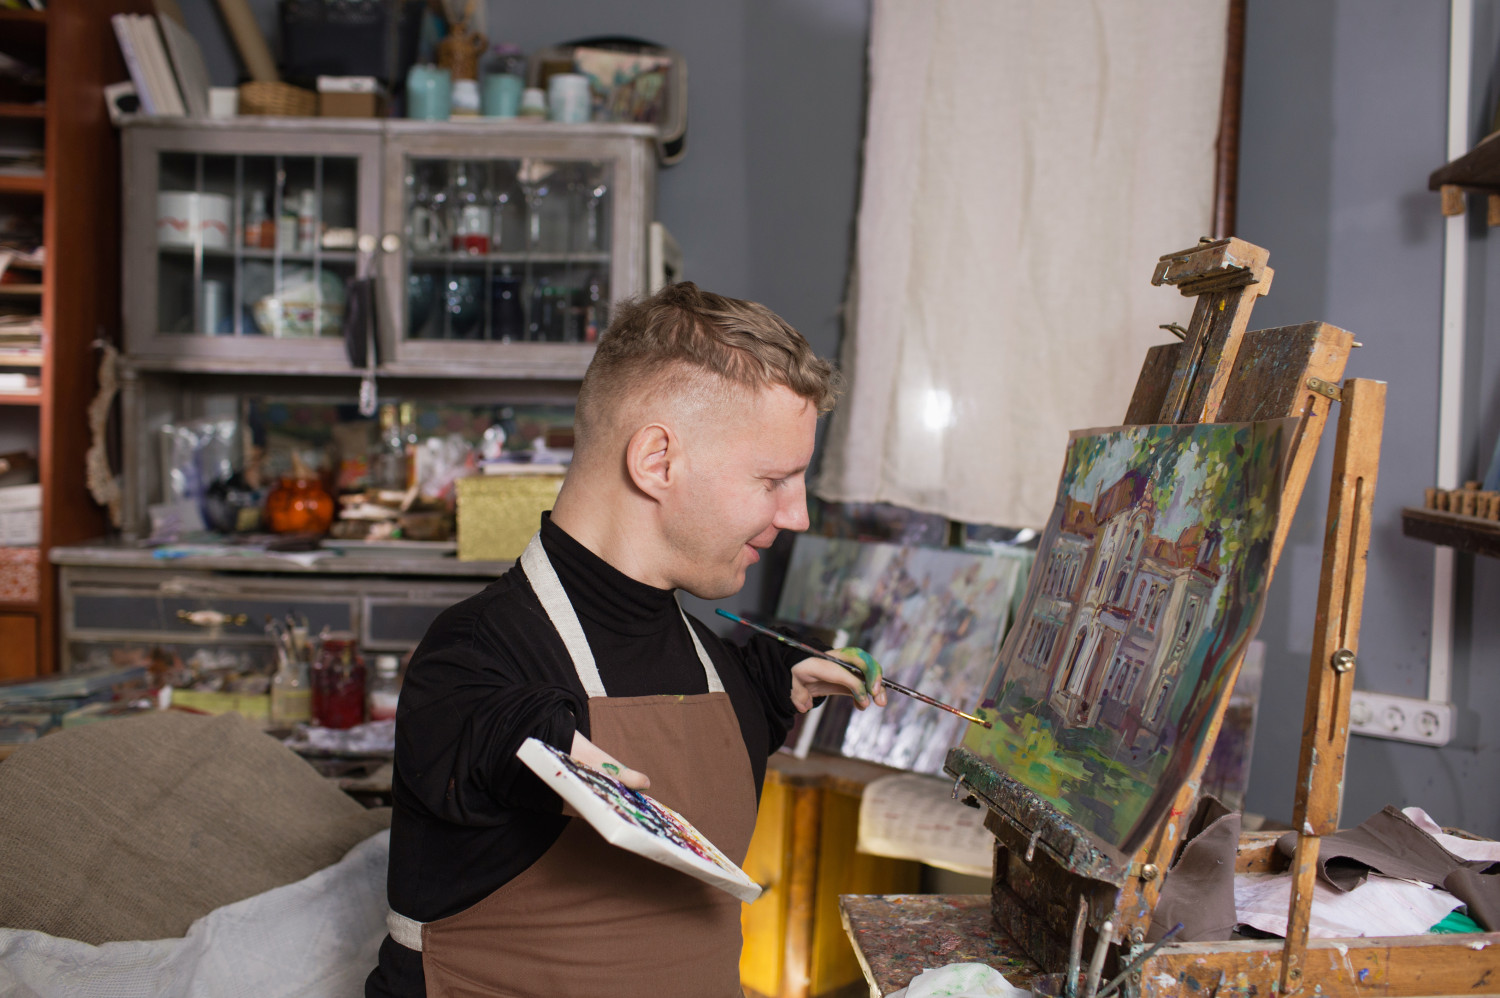 A man with a disability focused on painting a canvas in an art studio, in an art therapy session.